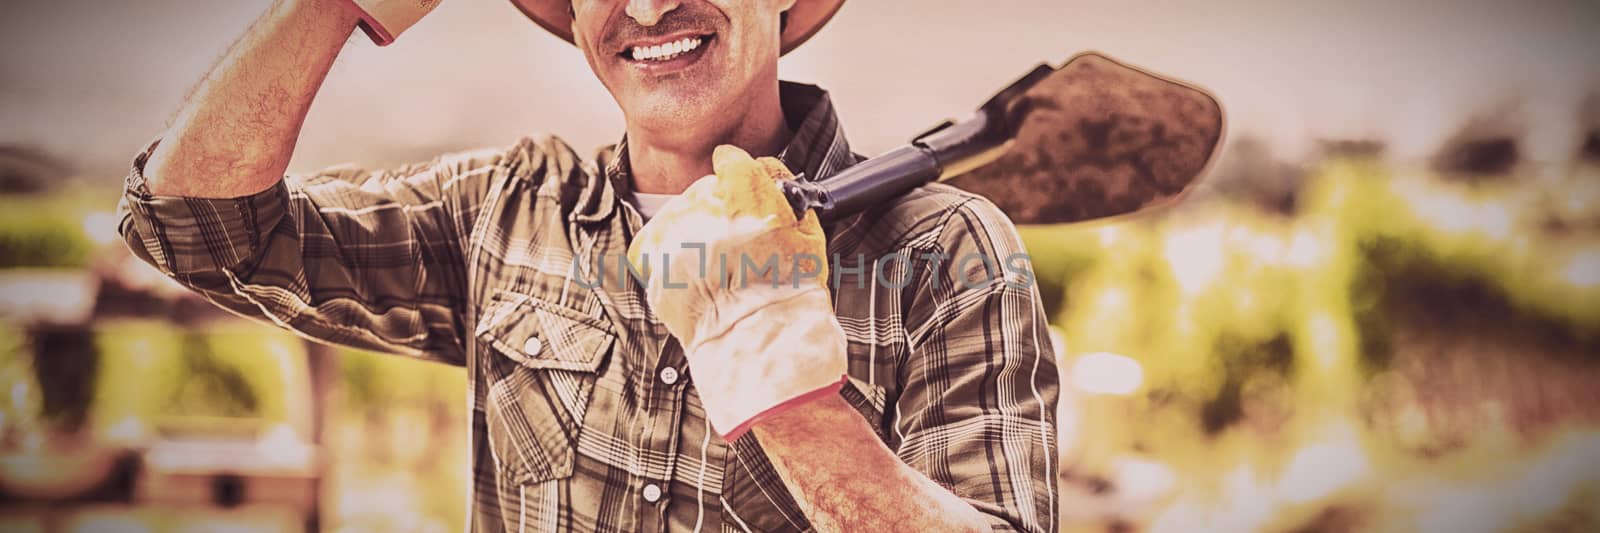 Portrait of farmer carrying shovel on a sunny day